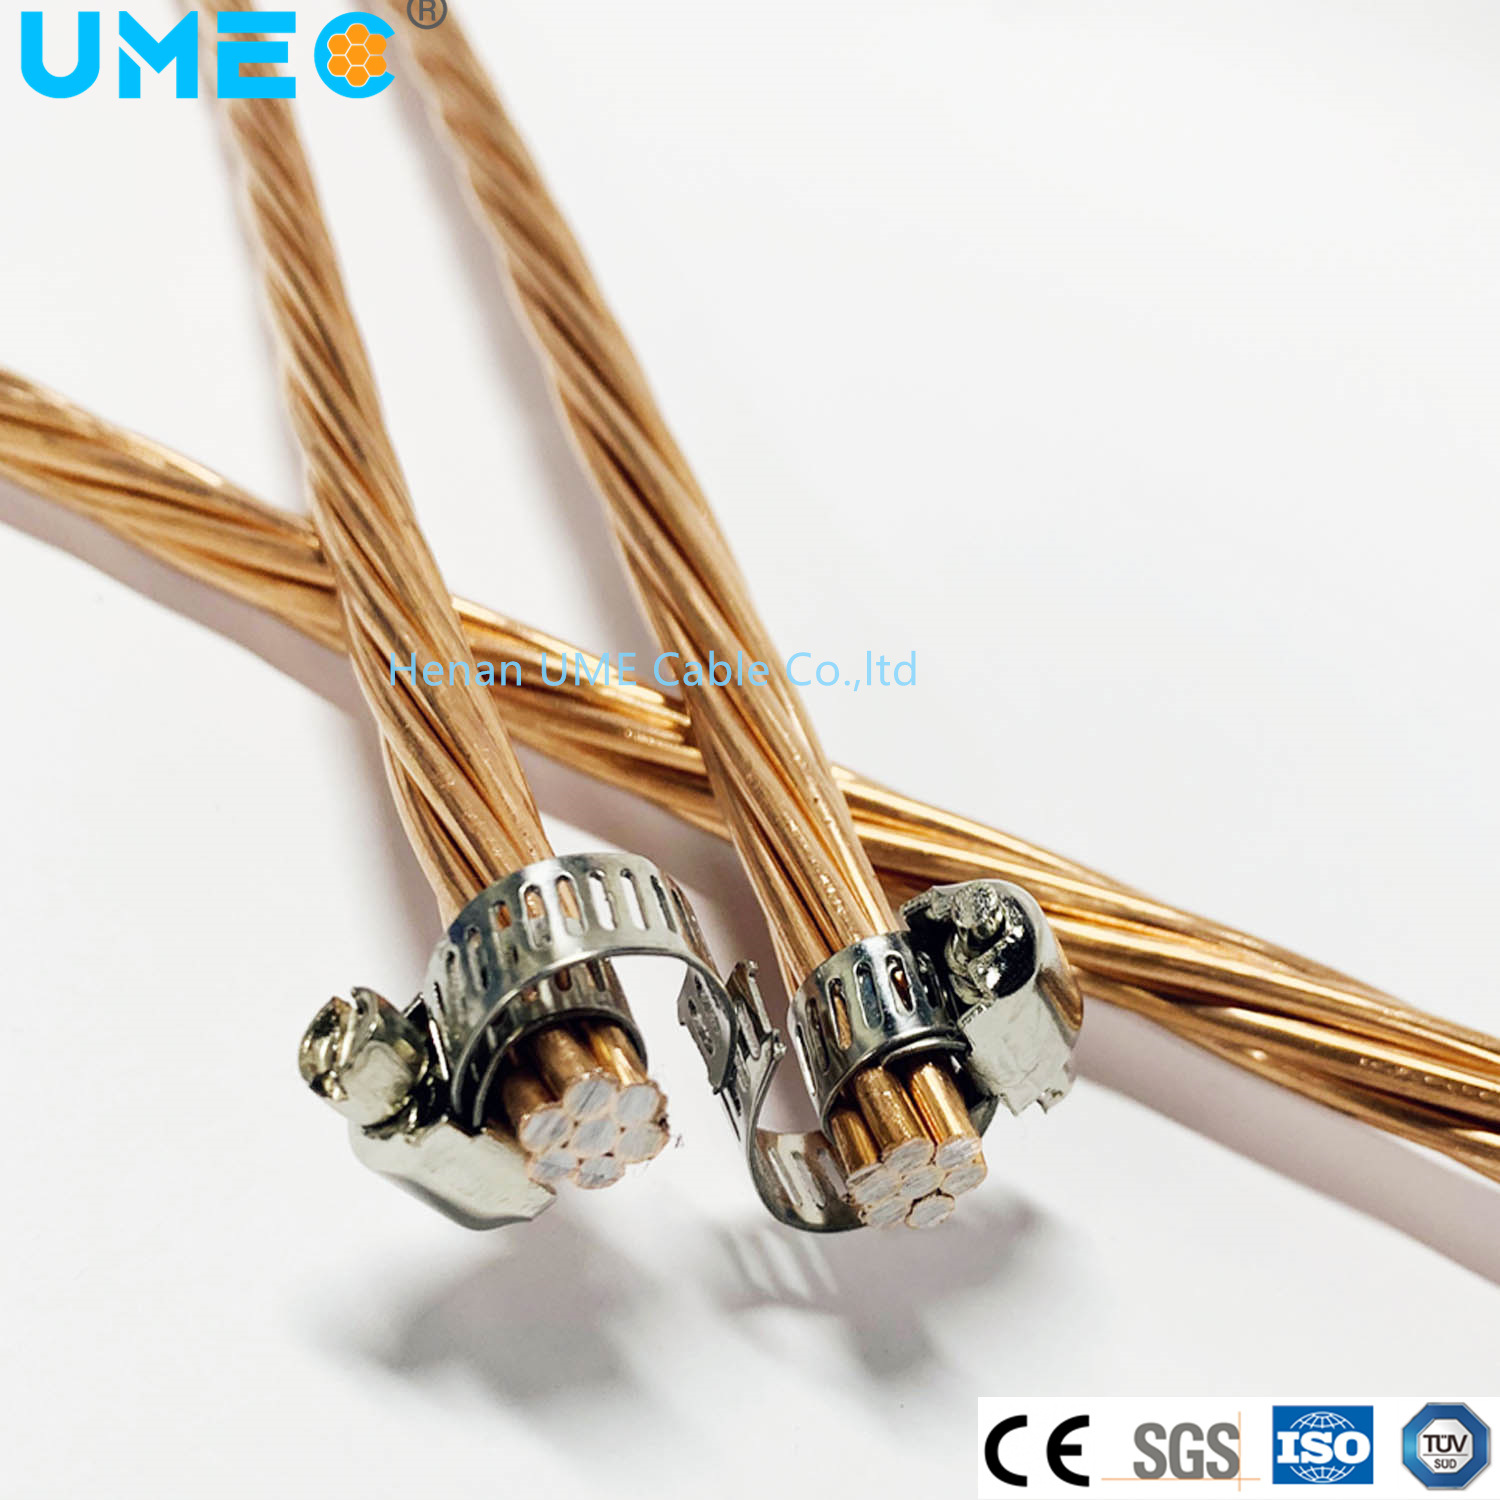 Coaxial Cable Wire Industry Bare Conductor Copper Clad Steel Wire CCS